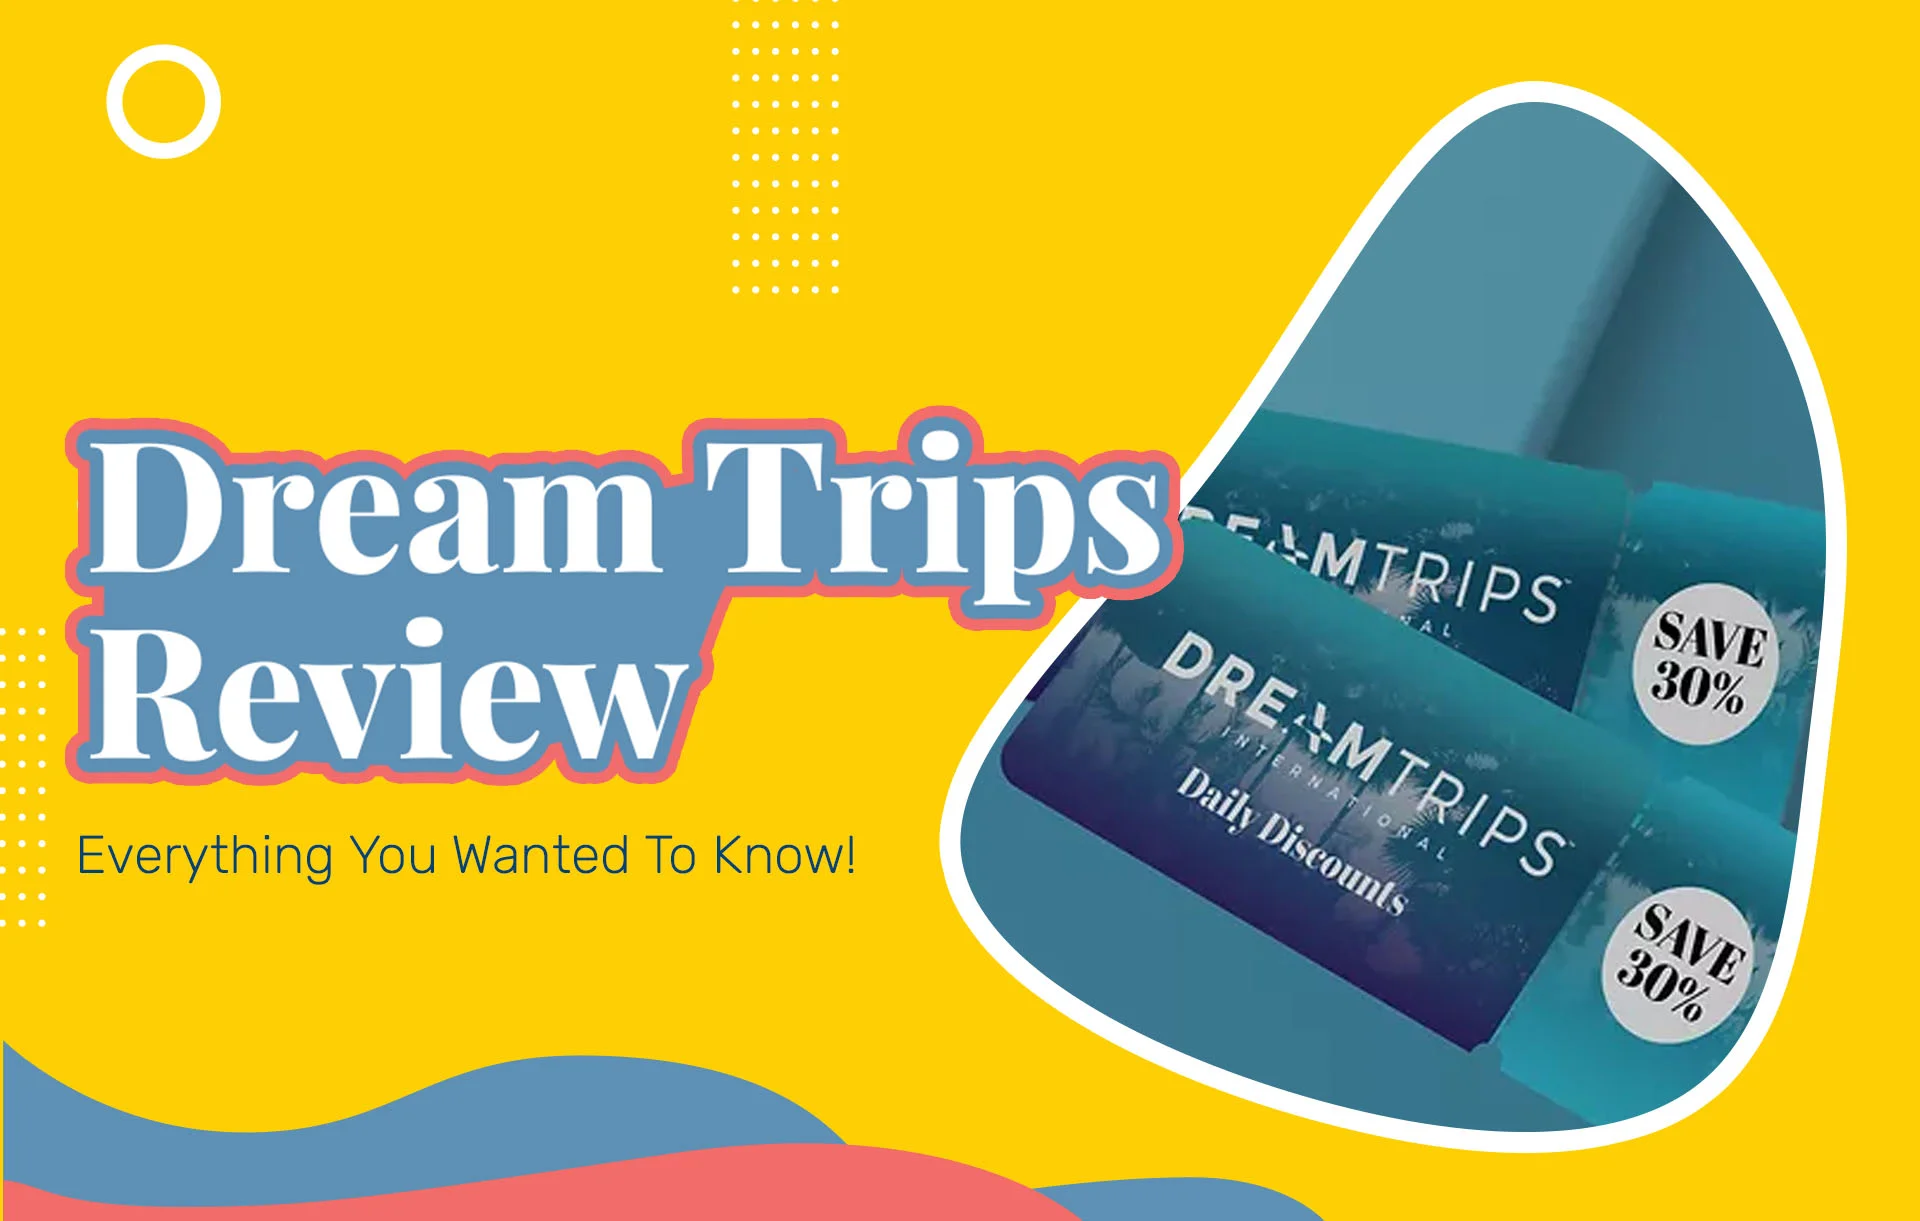 DreamTrips Reviews: Best MLM Company?